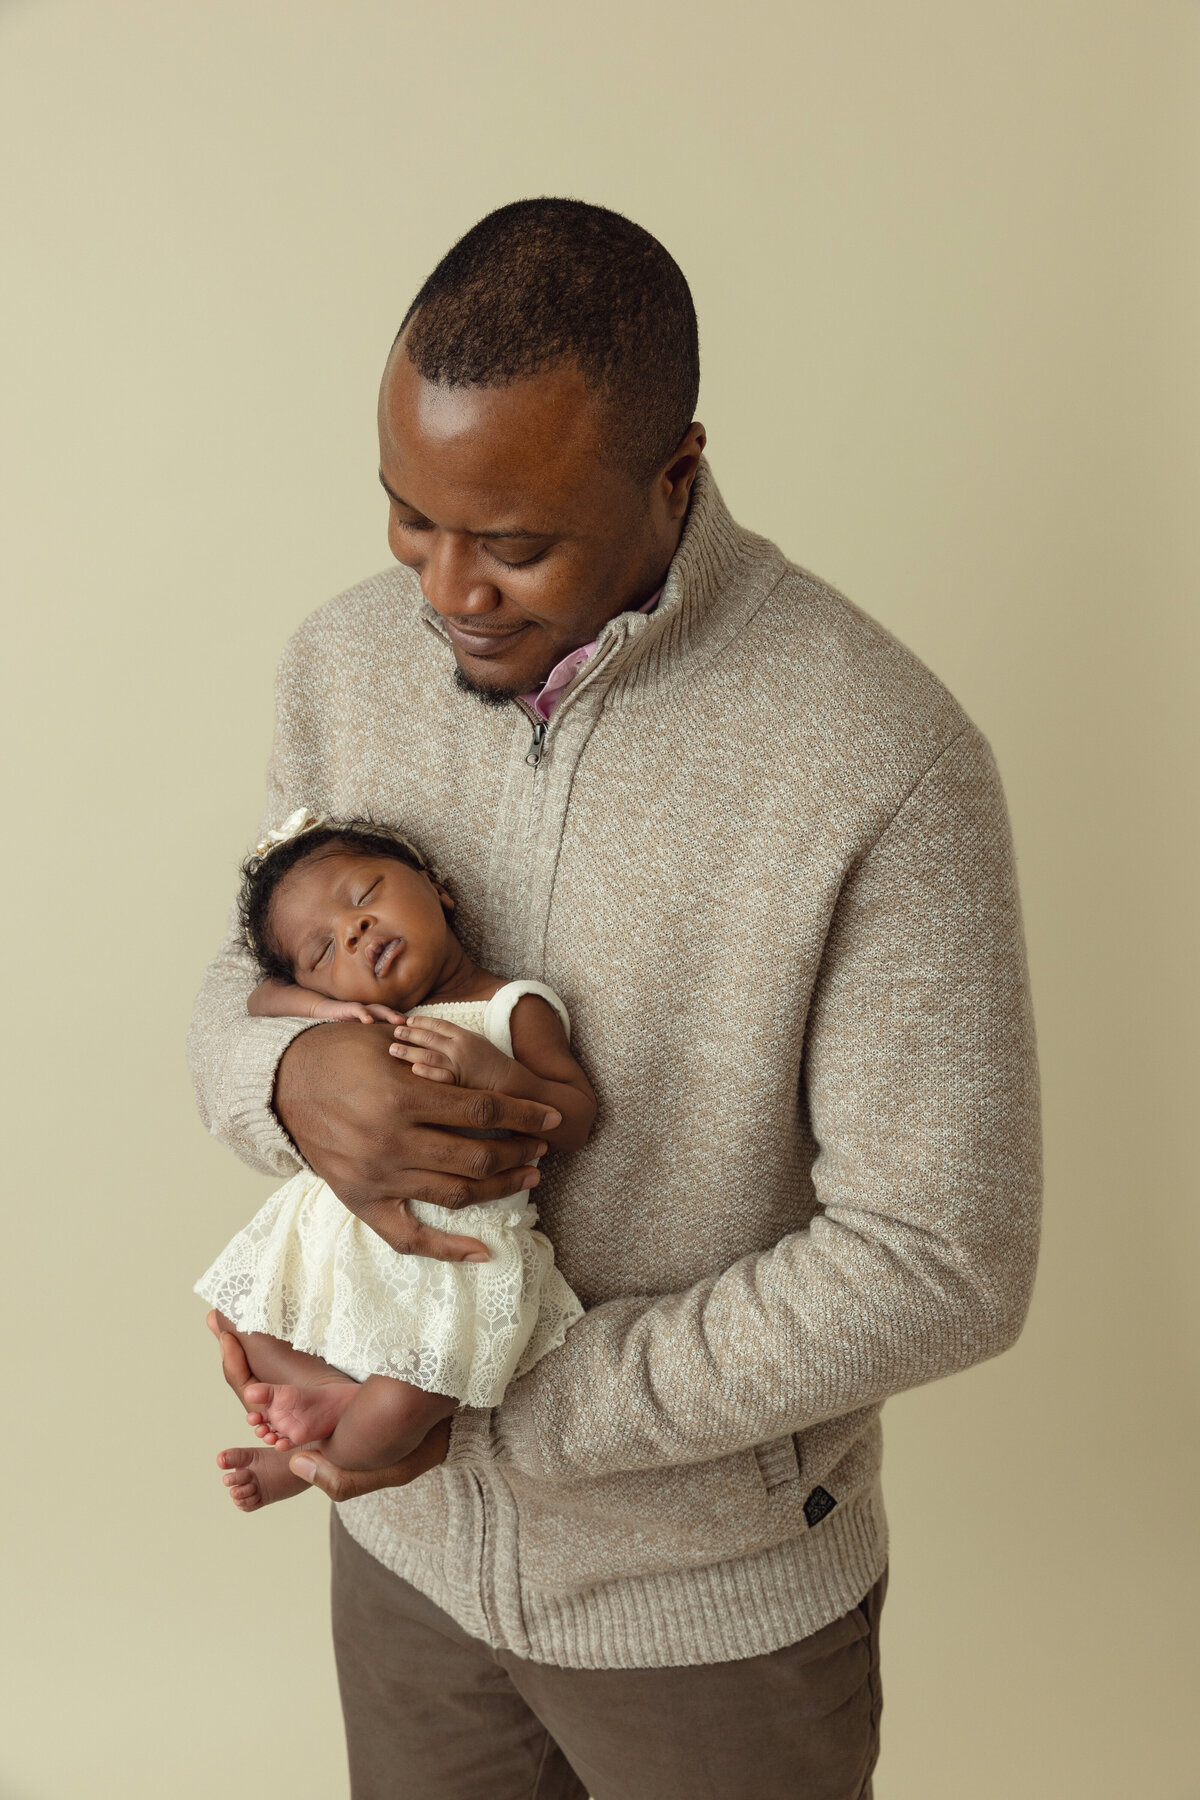 A happy dad in a grey sweater holds his sleeping newborn daughter in a white dress